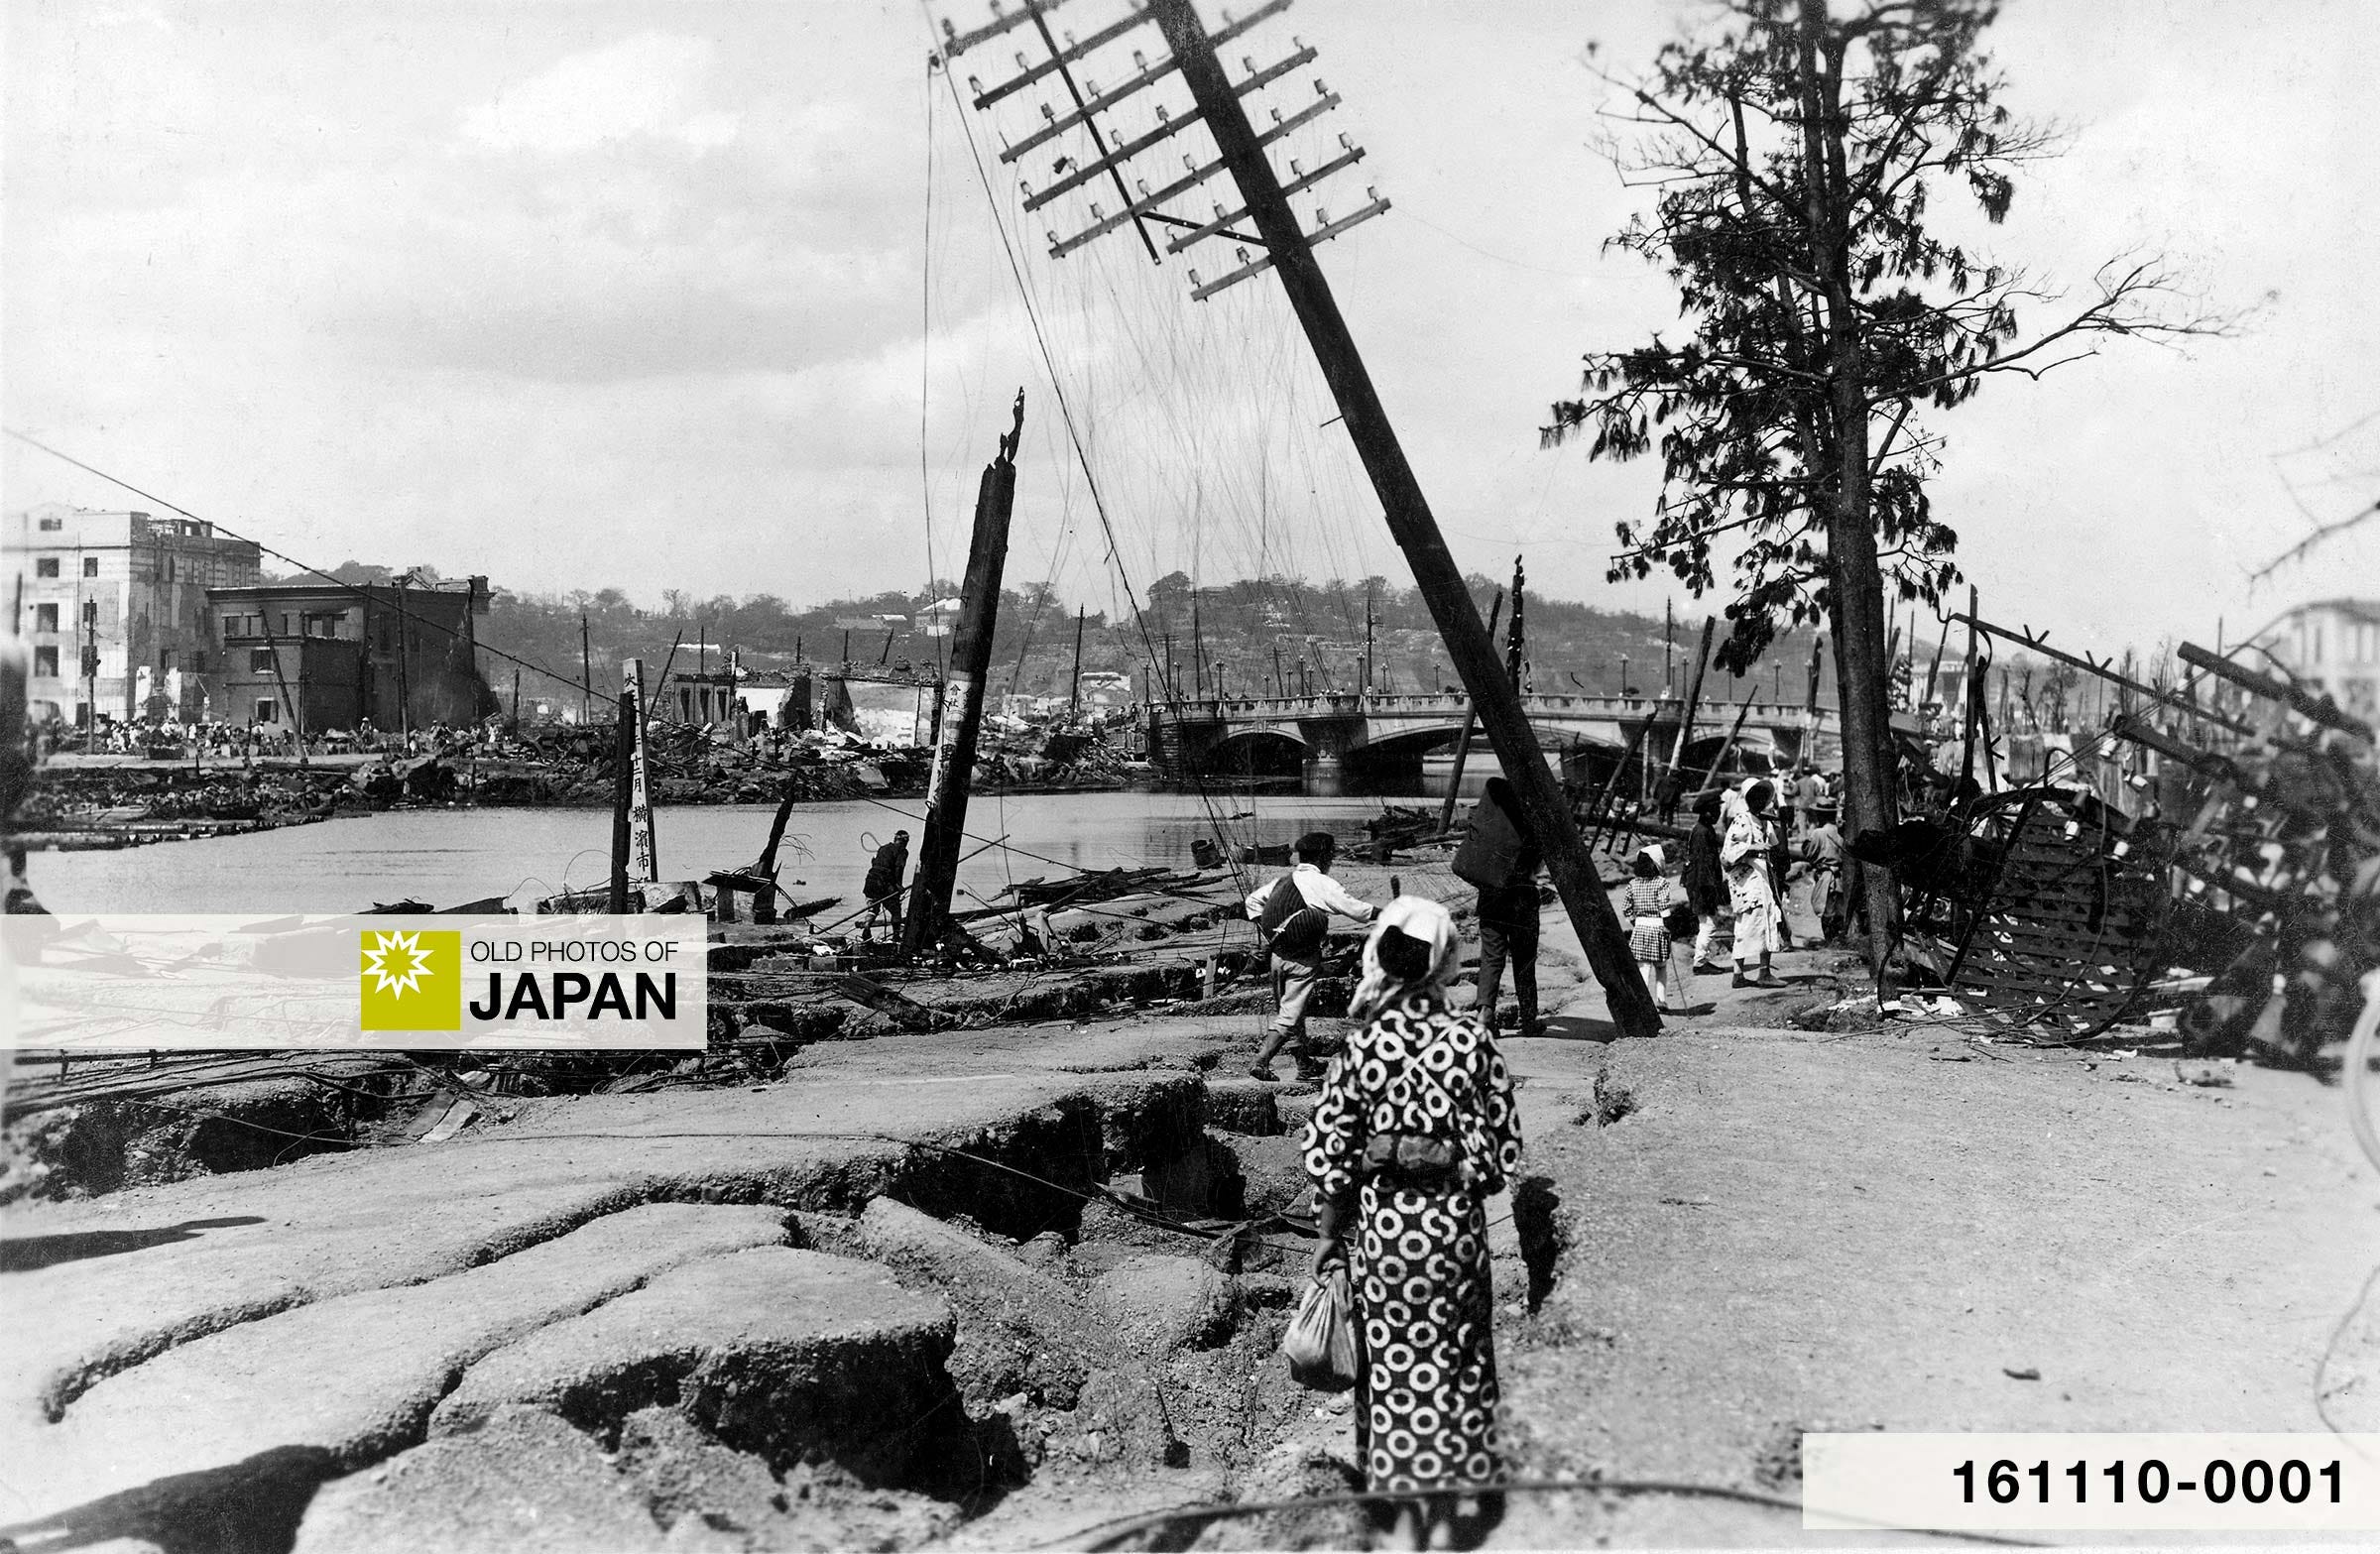 Devastation in Yokohama caused by the Great Kanto Earthquake of 1923